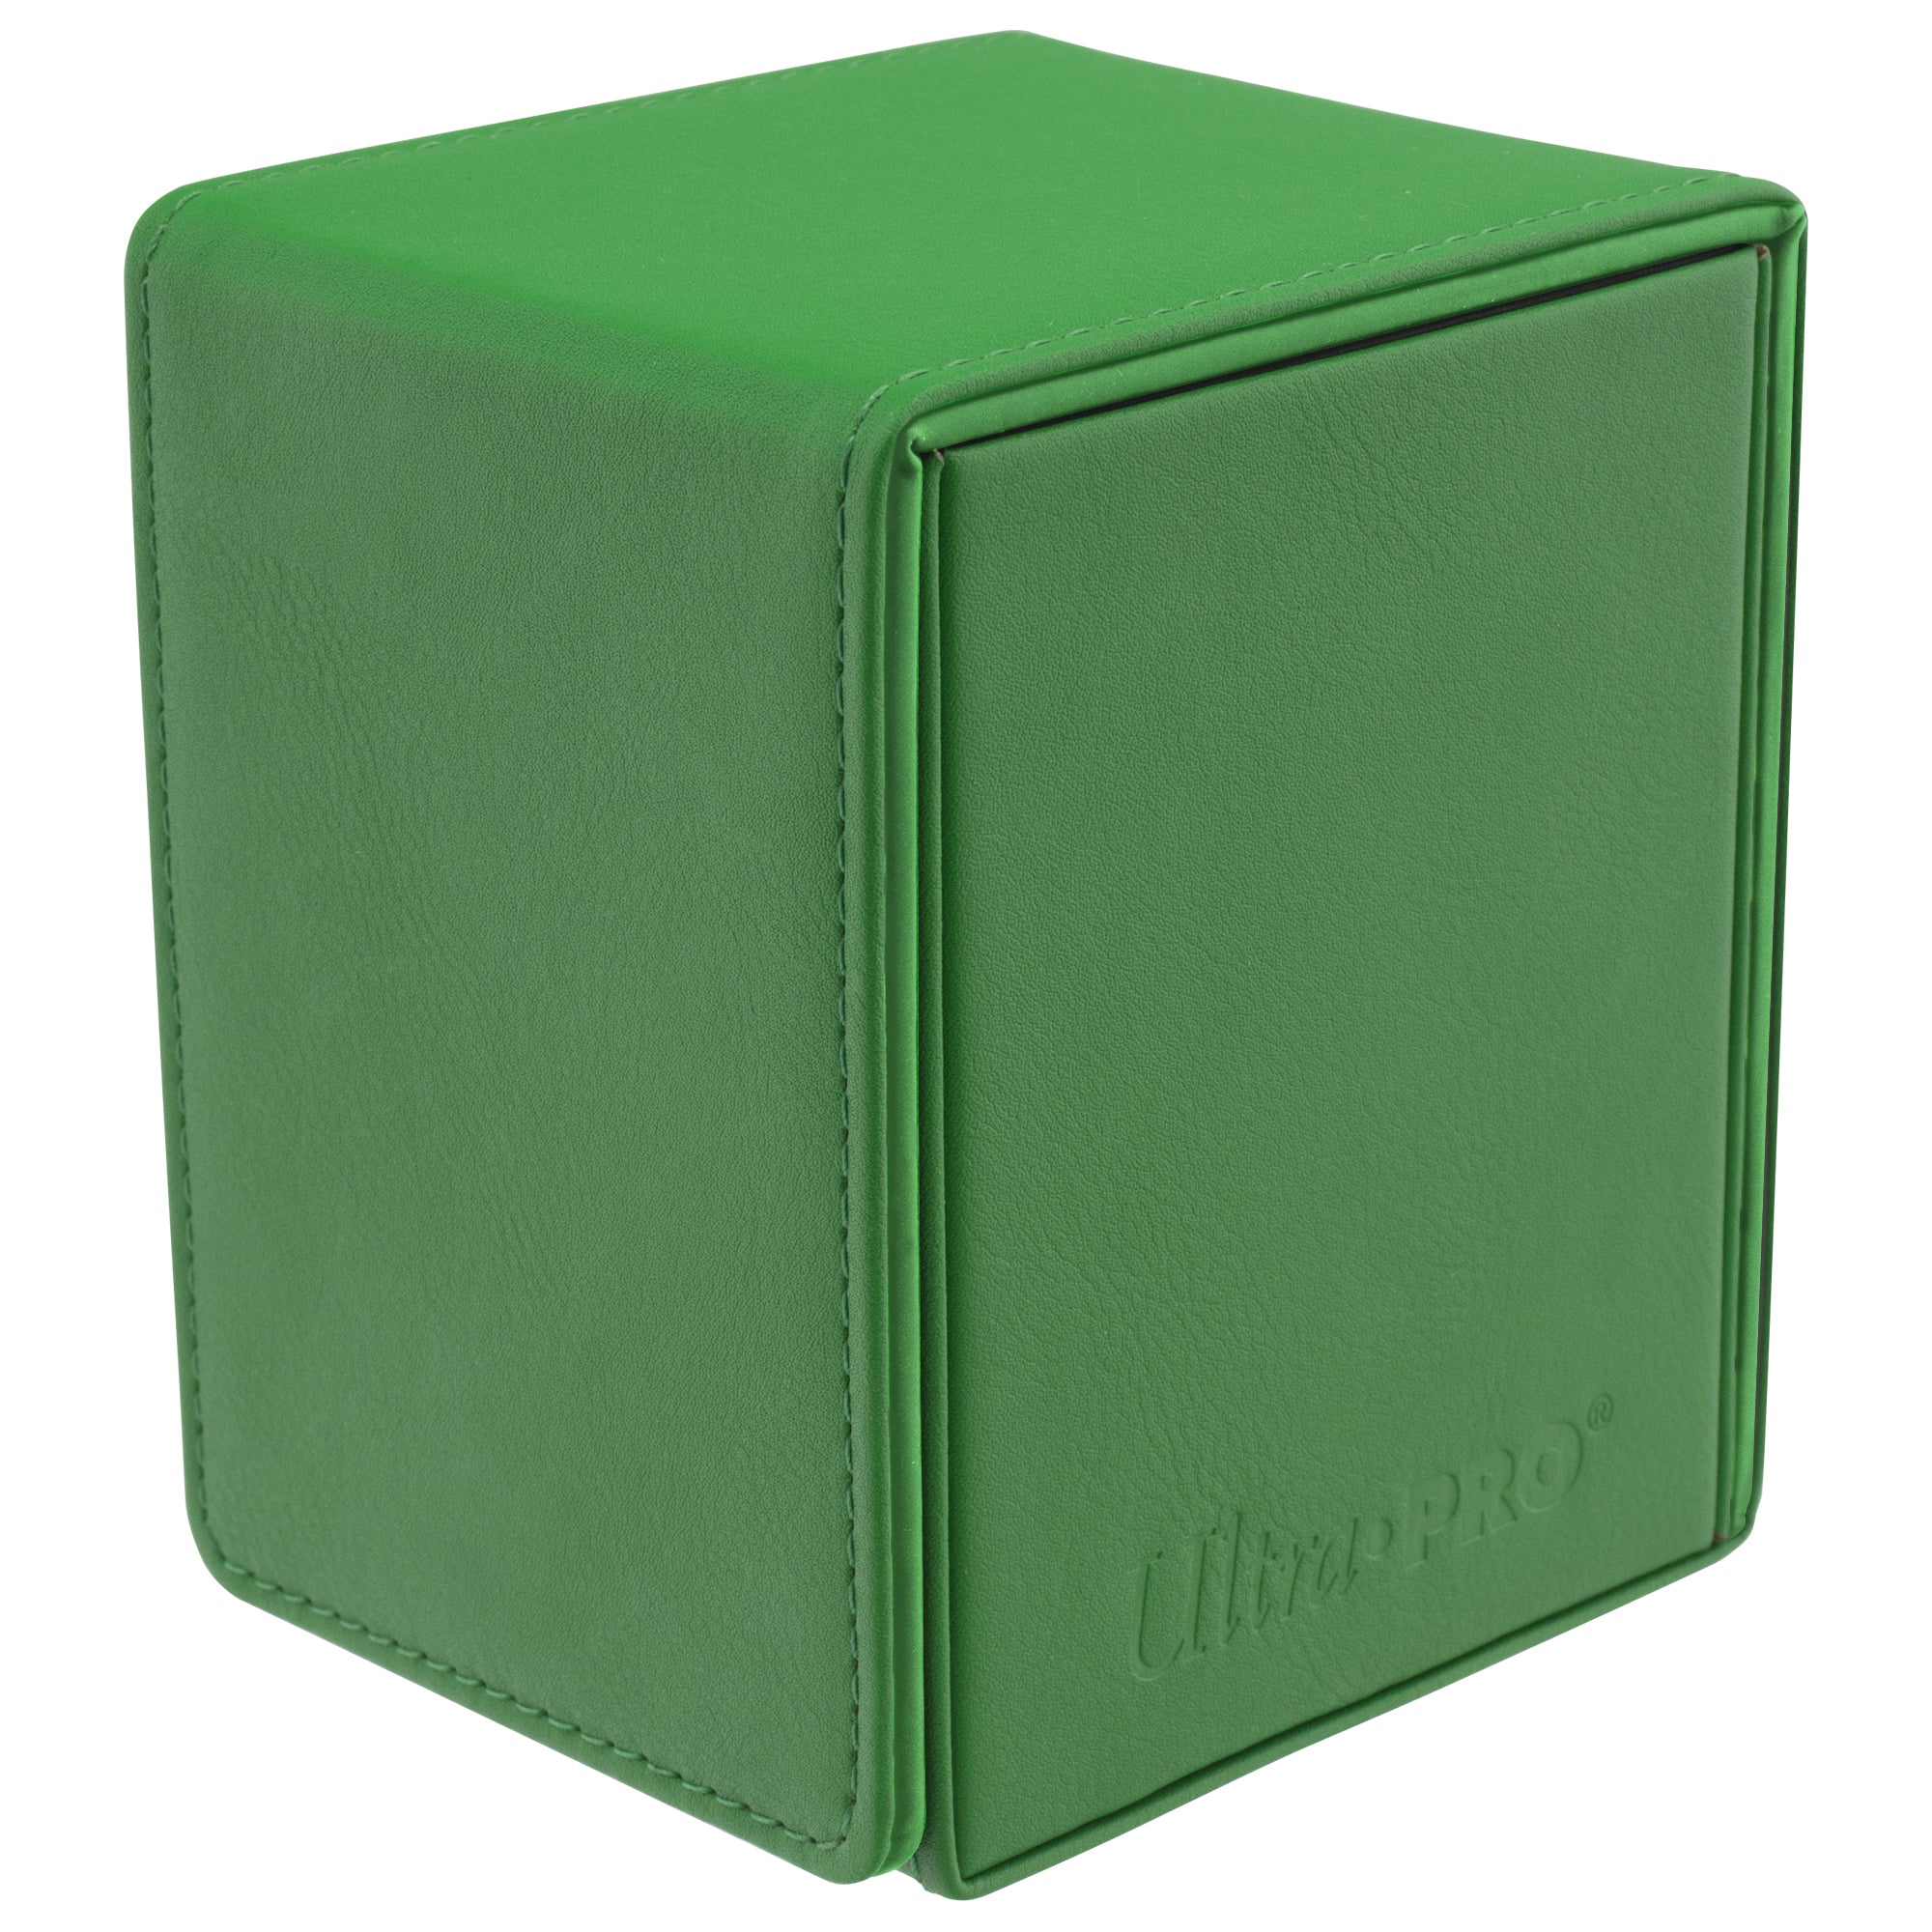 UP D-BOX ALCOVE FLIP VIVID GREEN | Jack's On Queen